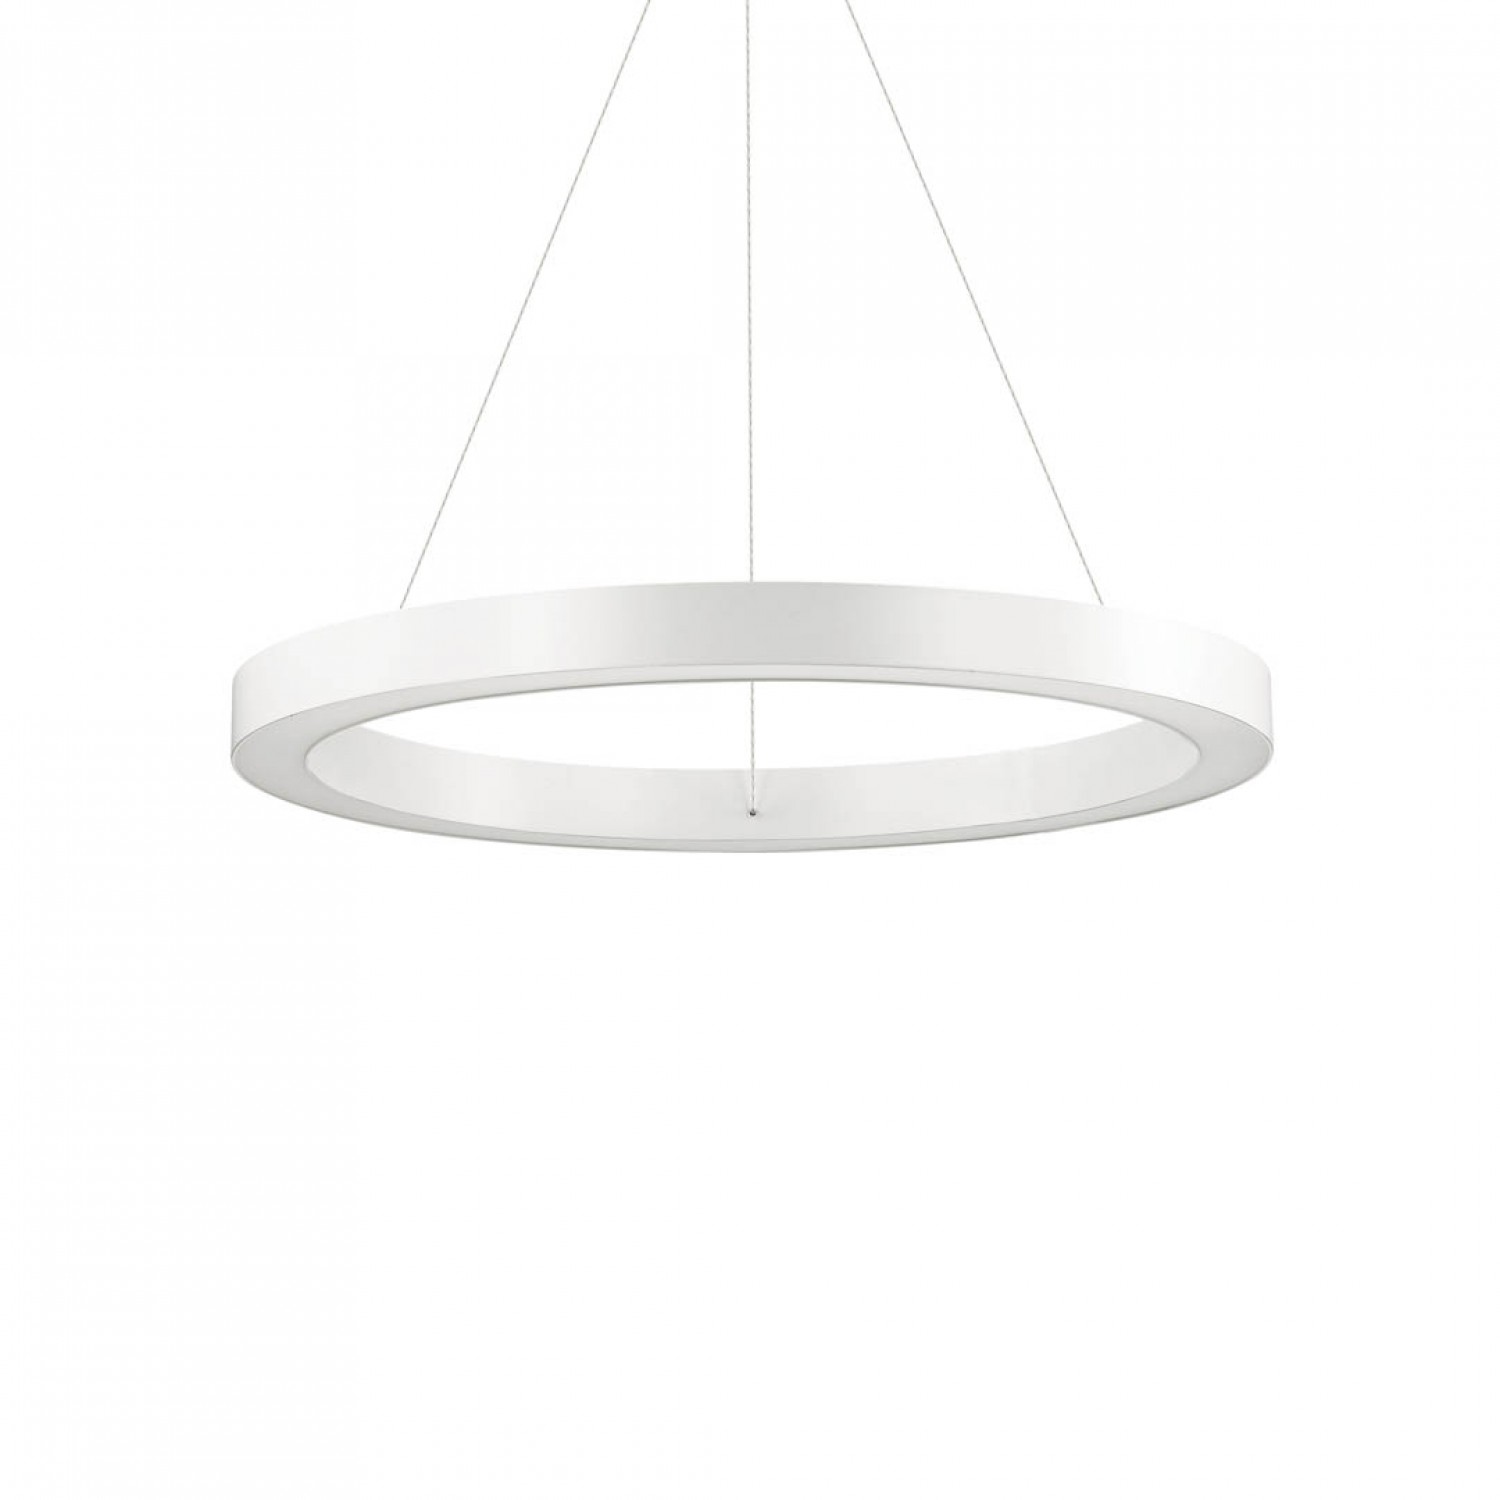 alt_image Люстра Ideal Lux ORACLE D60 ROUND BIANCO 211398